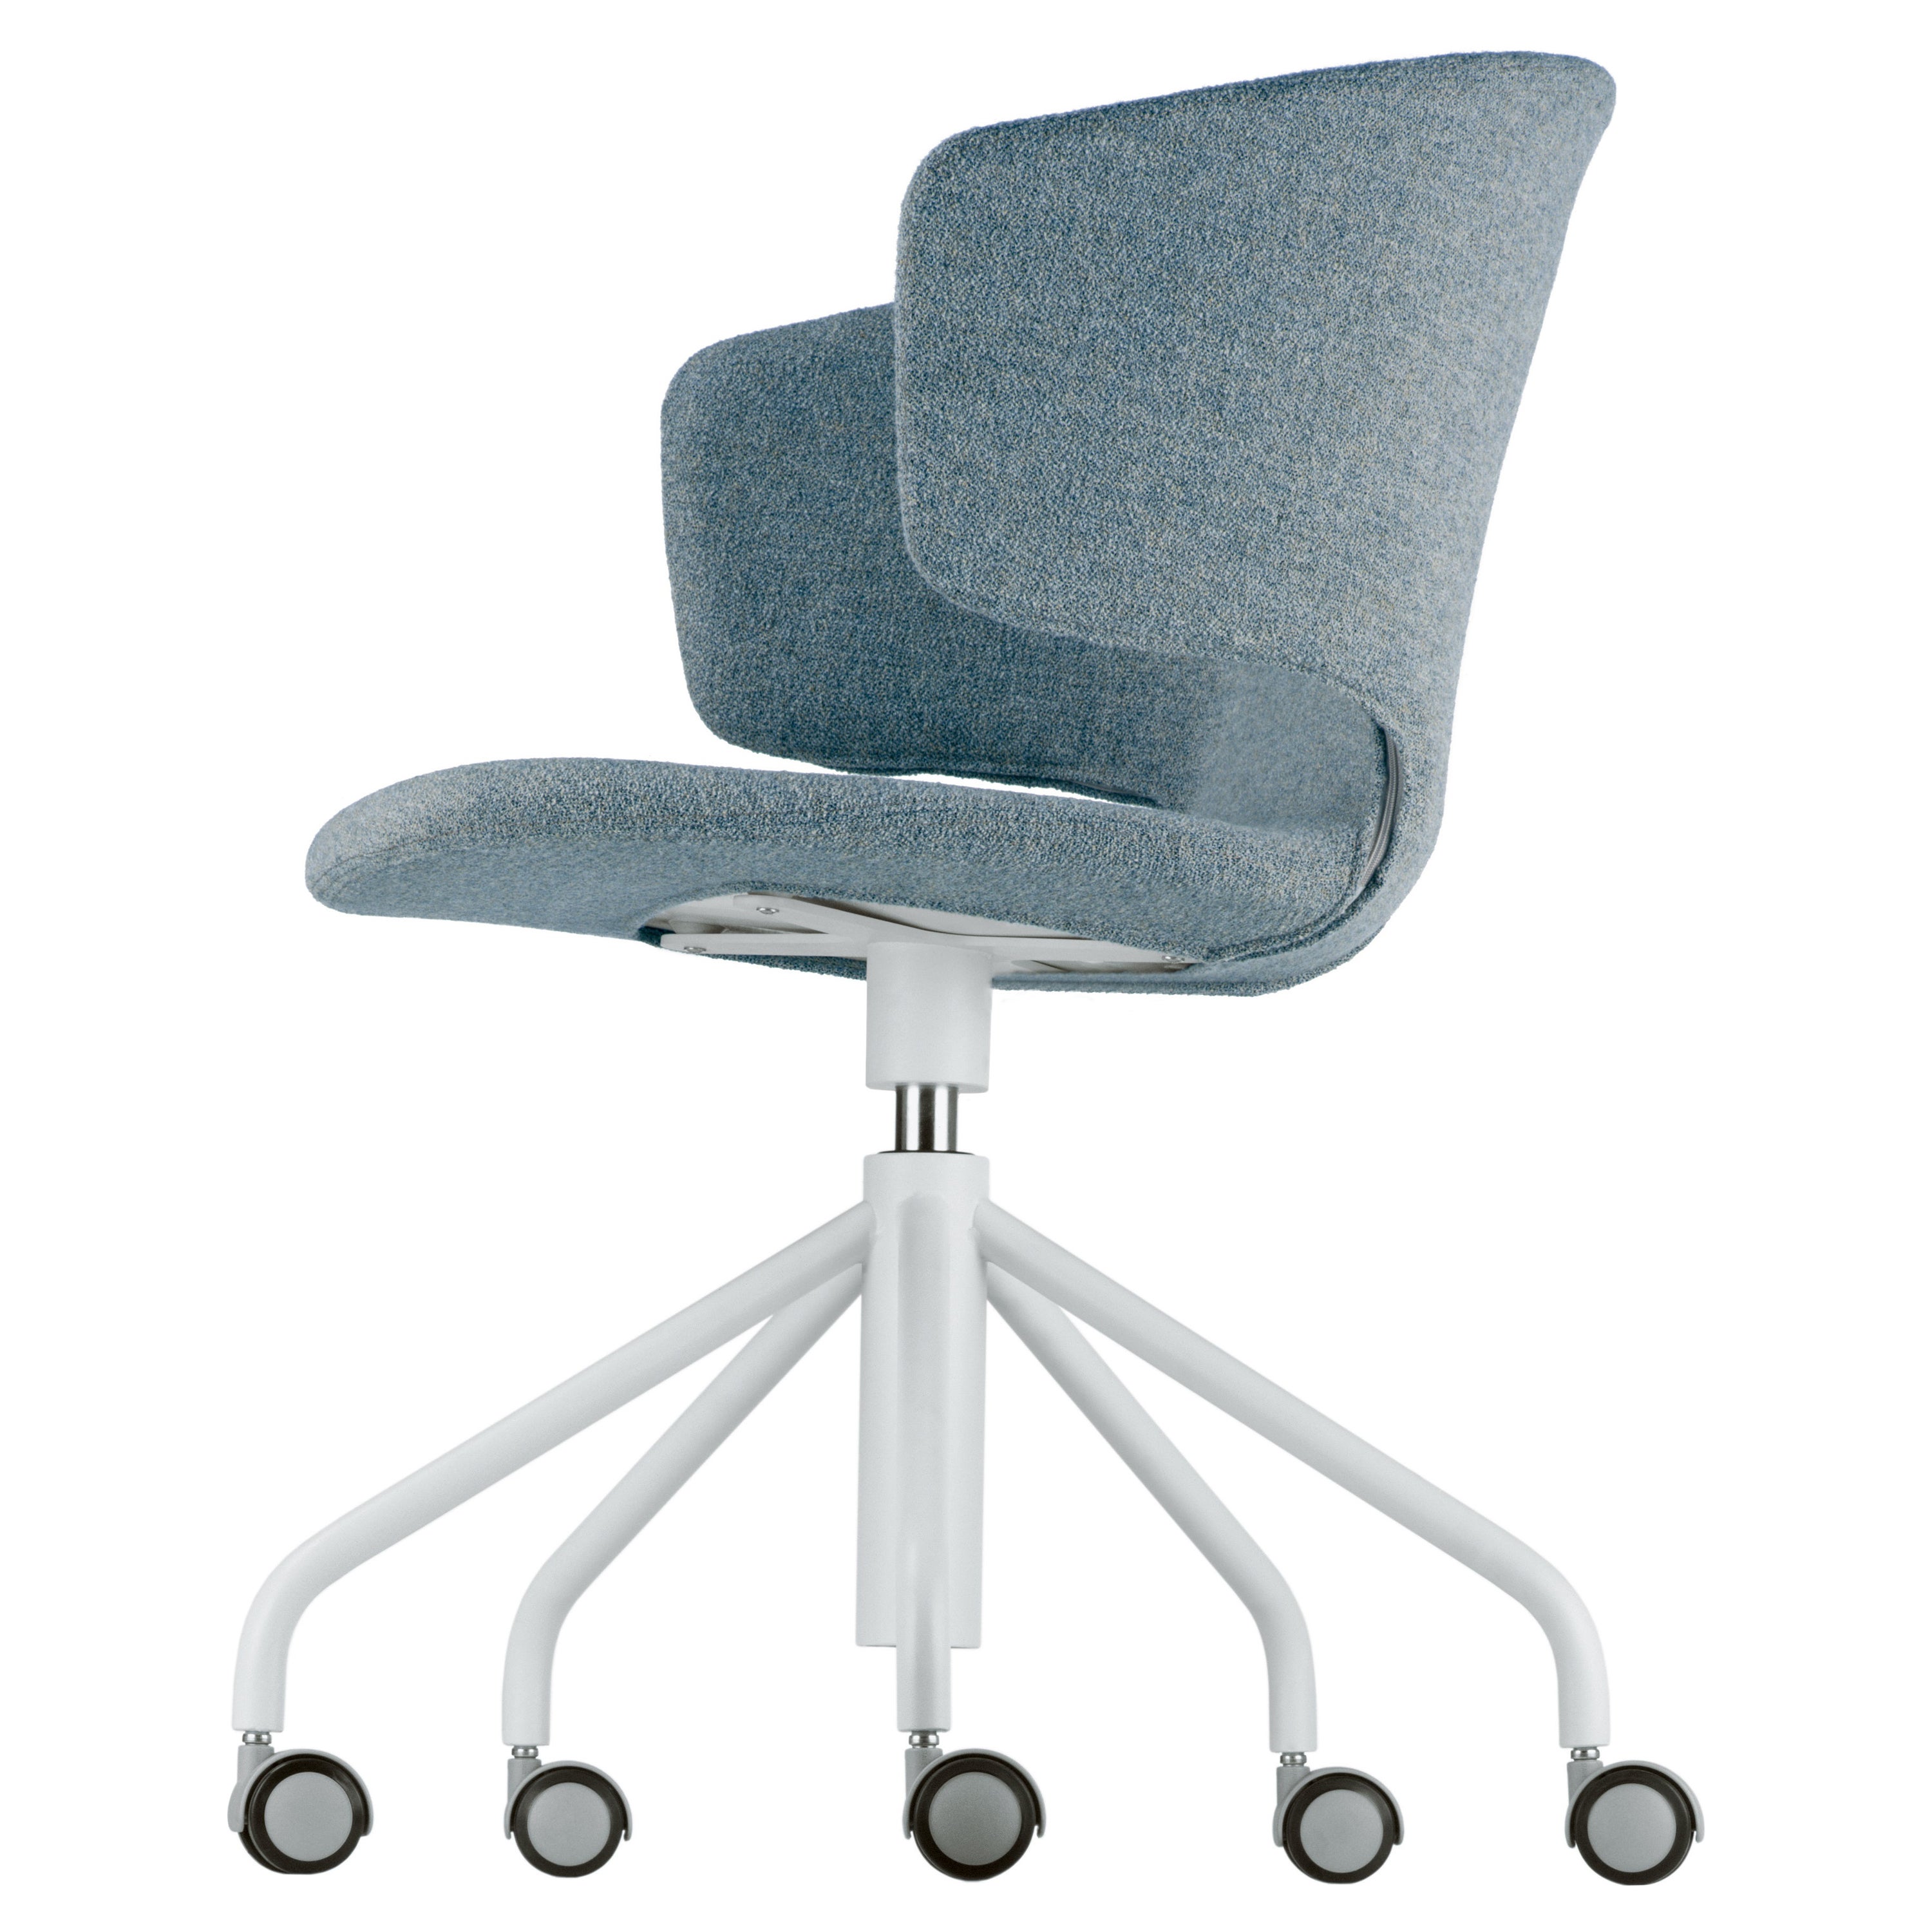 Alias 511 Taormina Studio Chair in Gray Seat and White Lacquered Steel For Sale